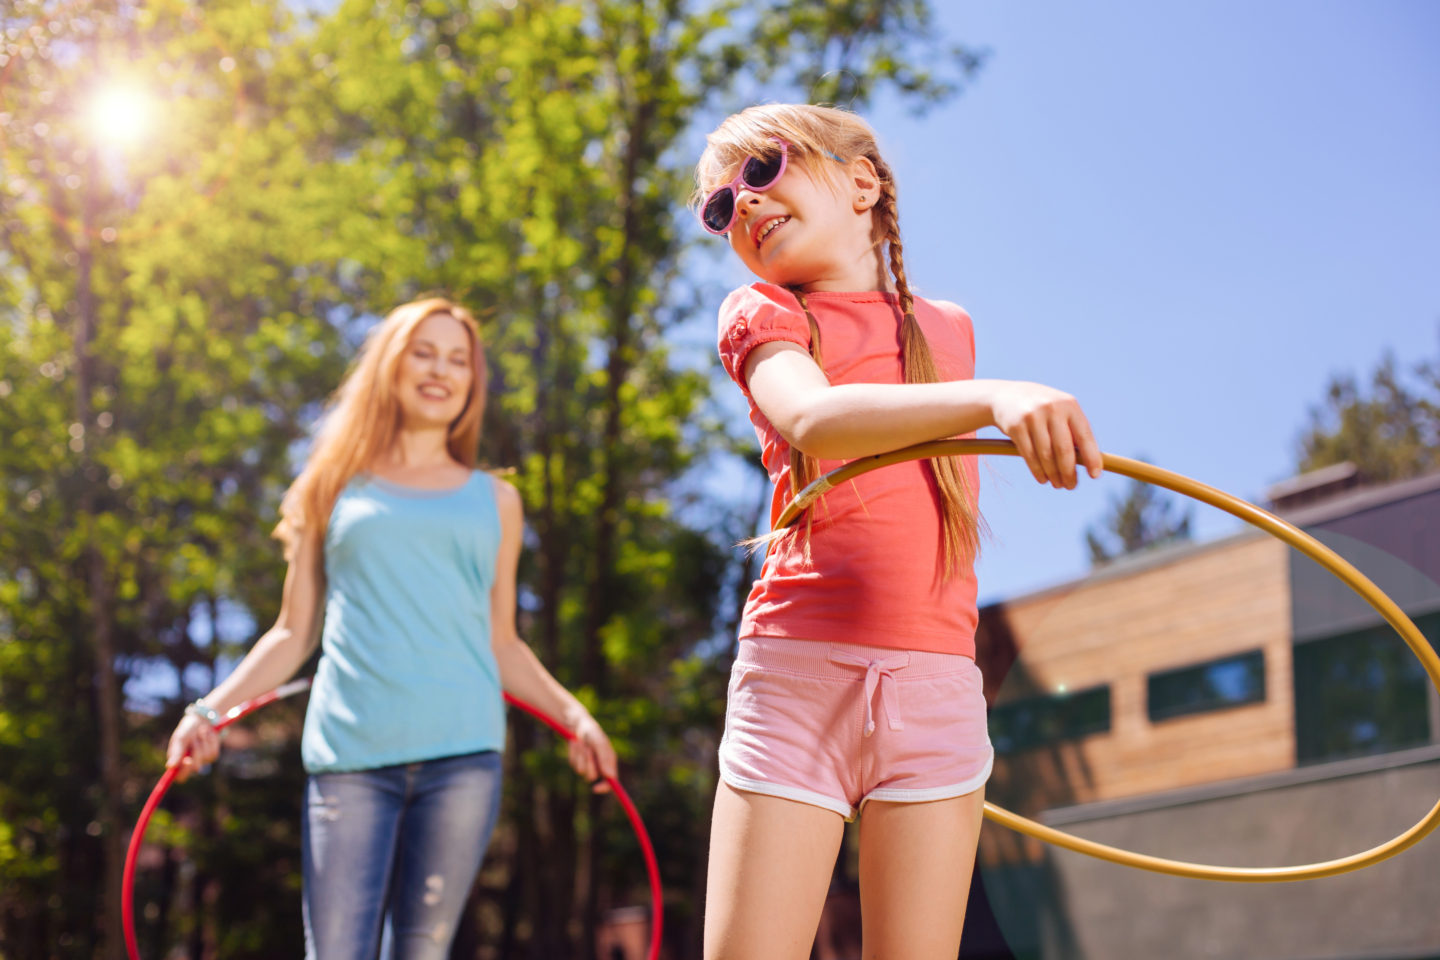 Best Outdoor Family Bonding Activities To Try This Summer: Friendly Family Competitions